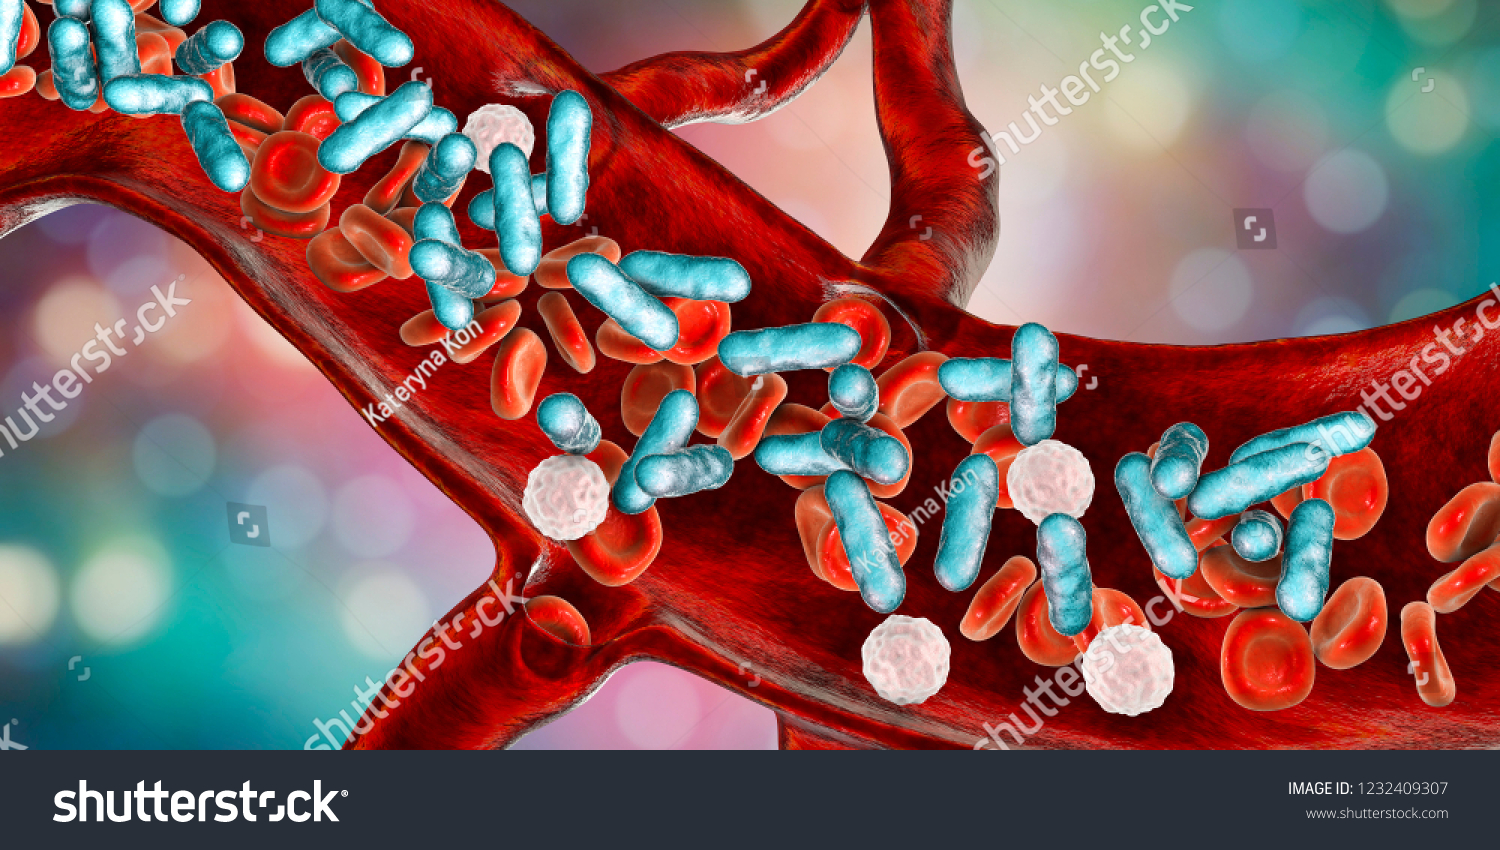 Sepsis, bacteria in blood. 3D illustration showing rod-shaped bacteria with red blood cells and leukocytes